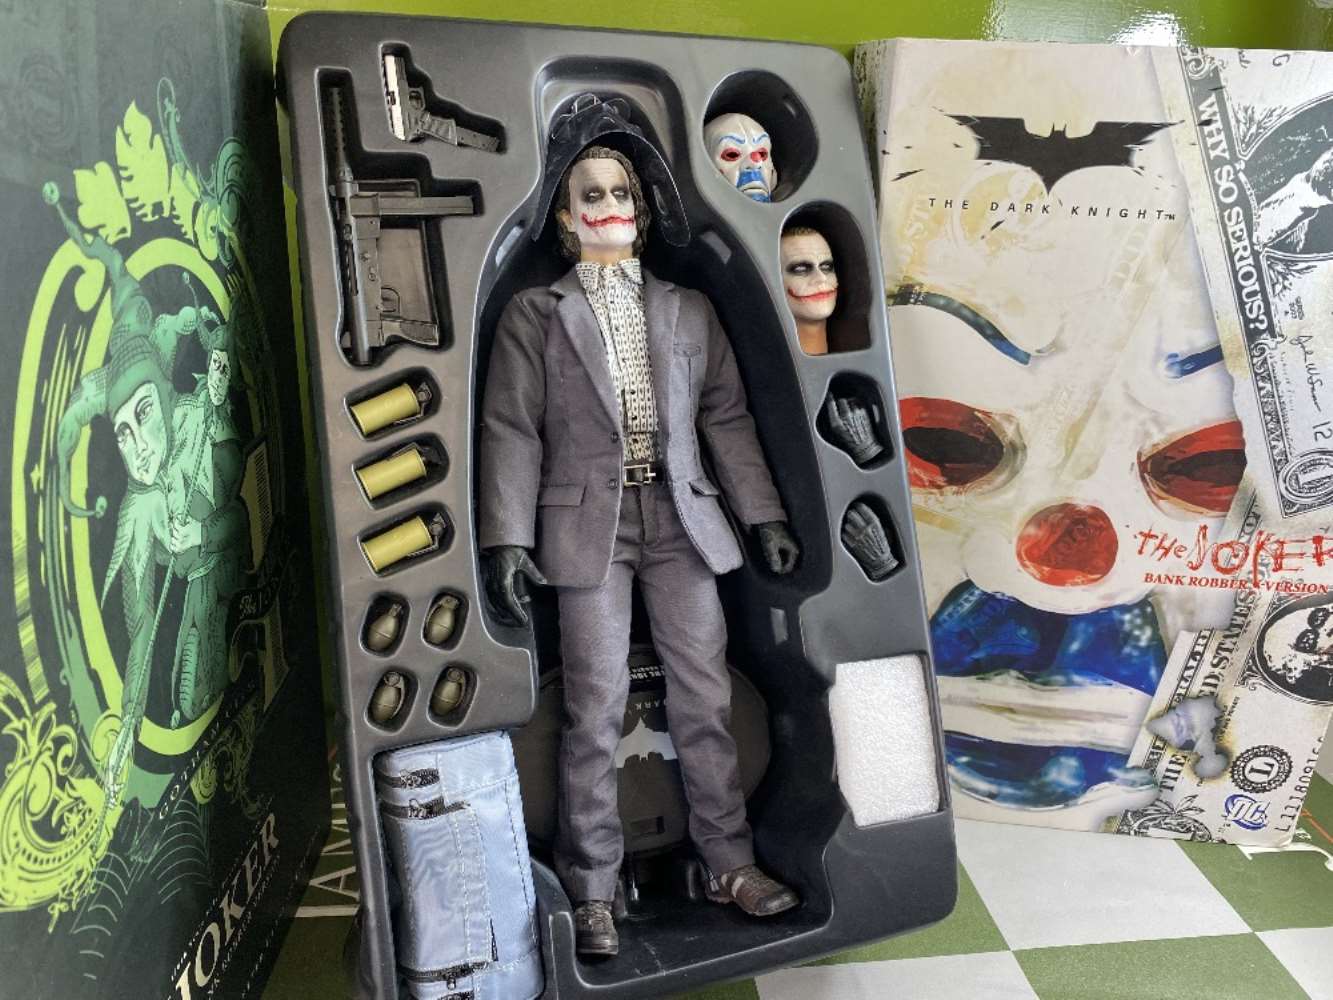 Hot Toys The Joker Bank Robber Edition 1/6 Scale Figure - Image 6 of 7